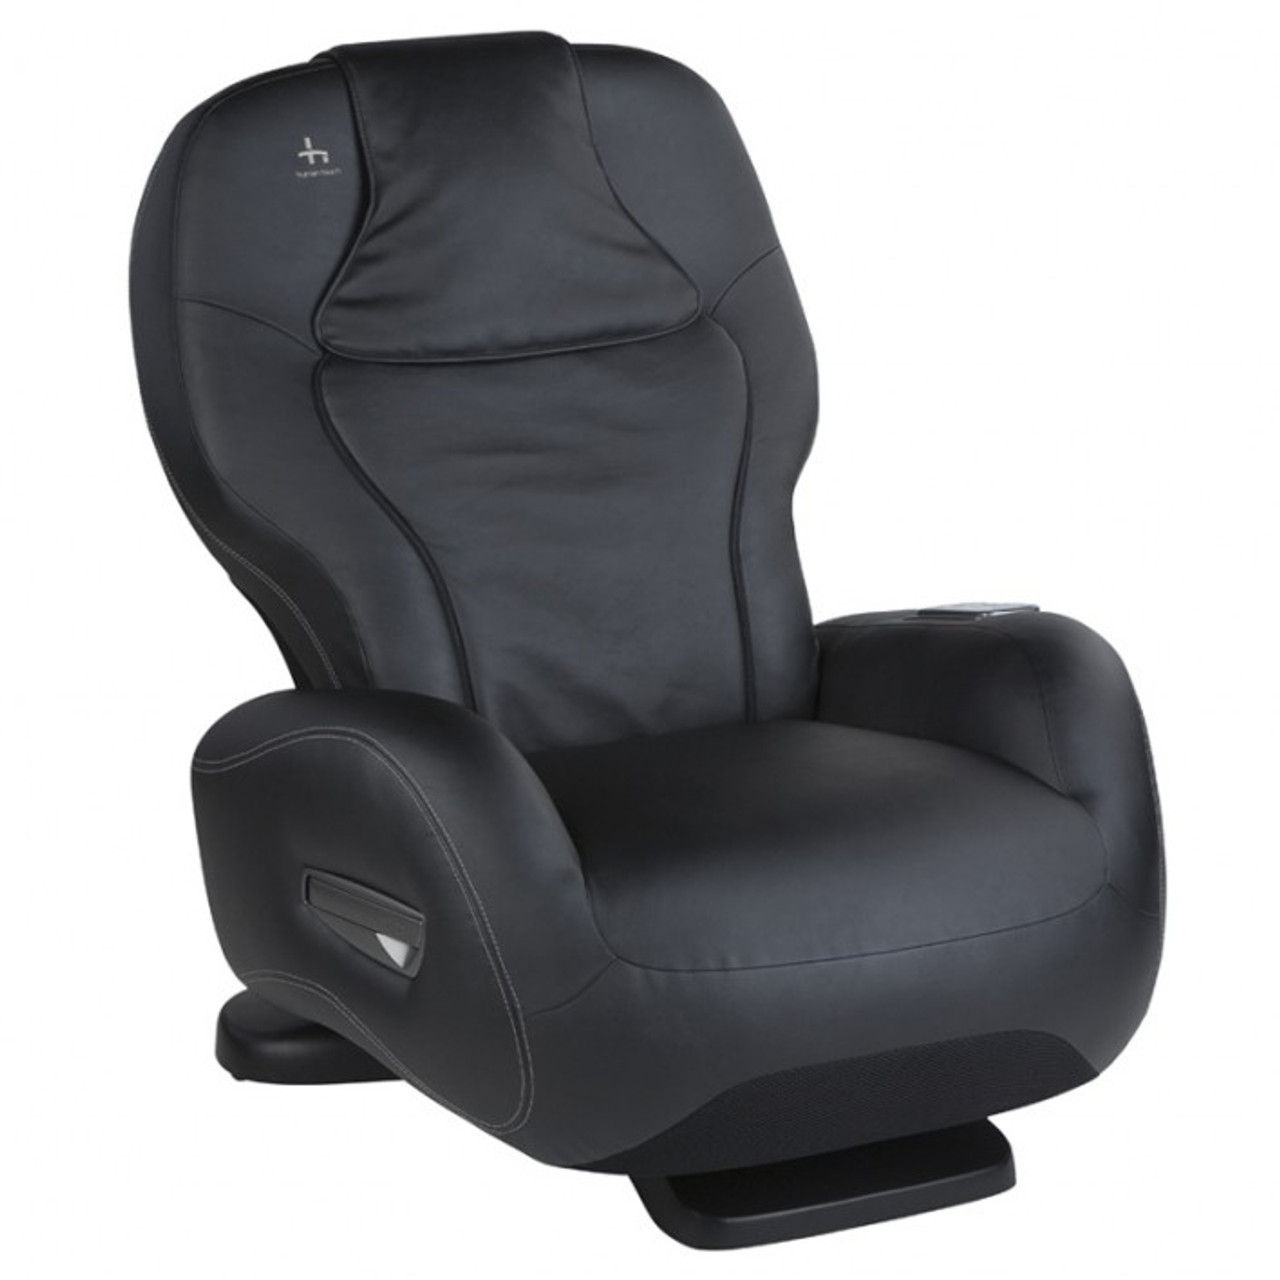 Human Touch iJoy 2720 Massage Chair- On Sale